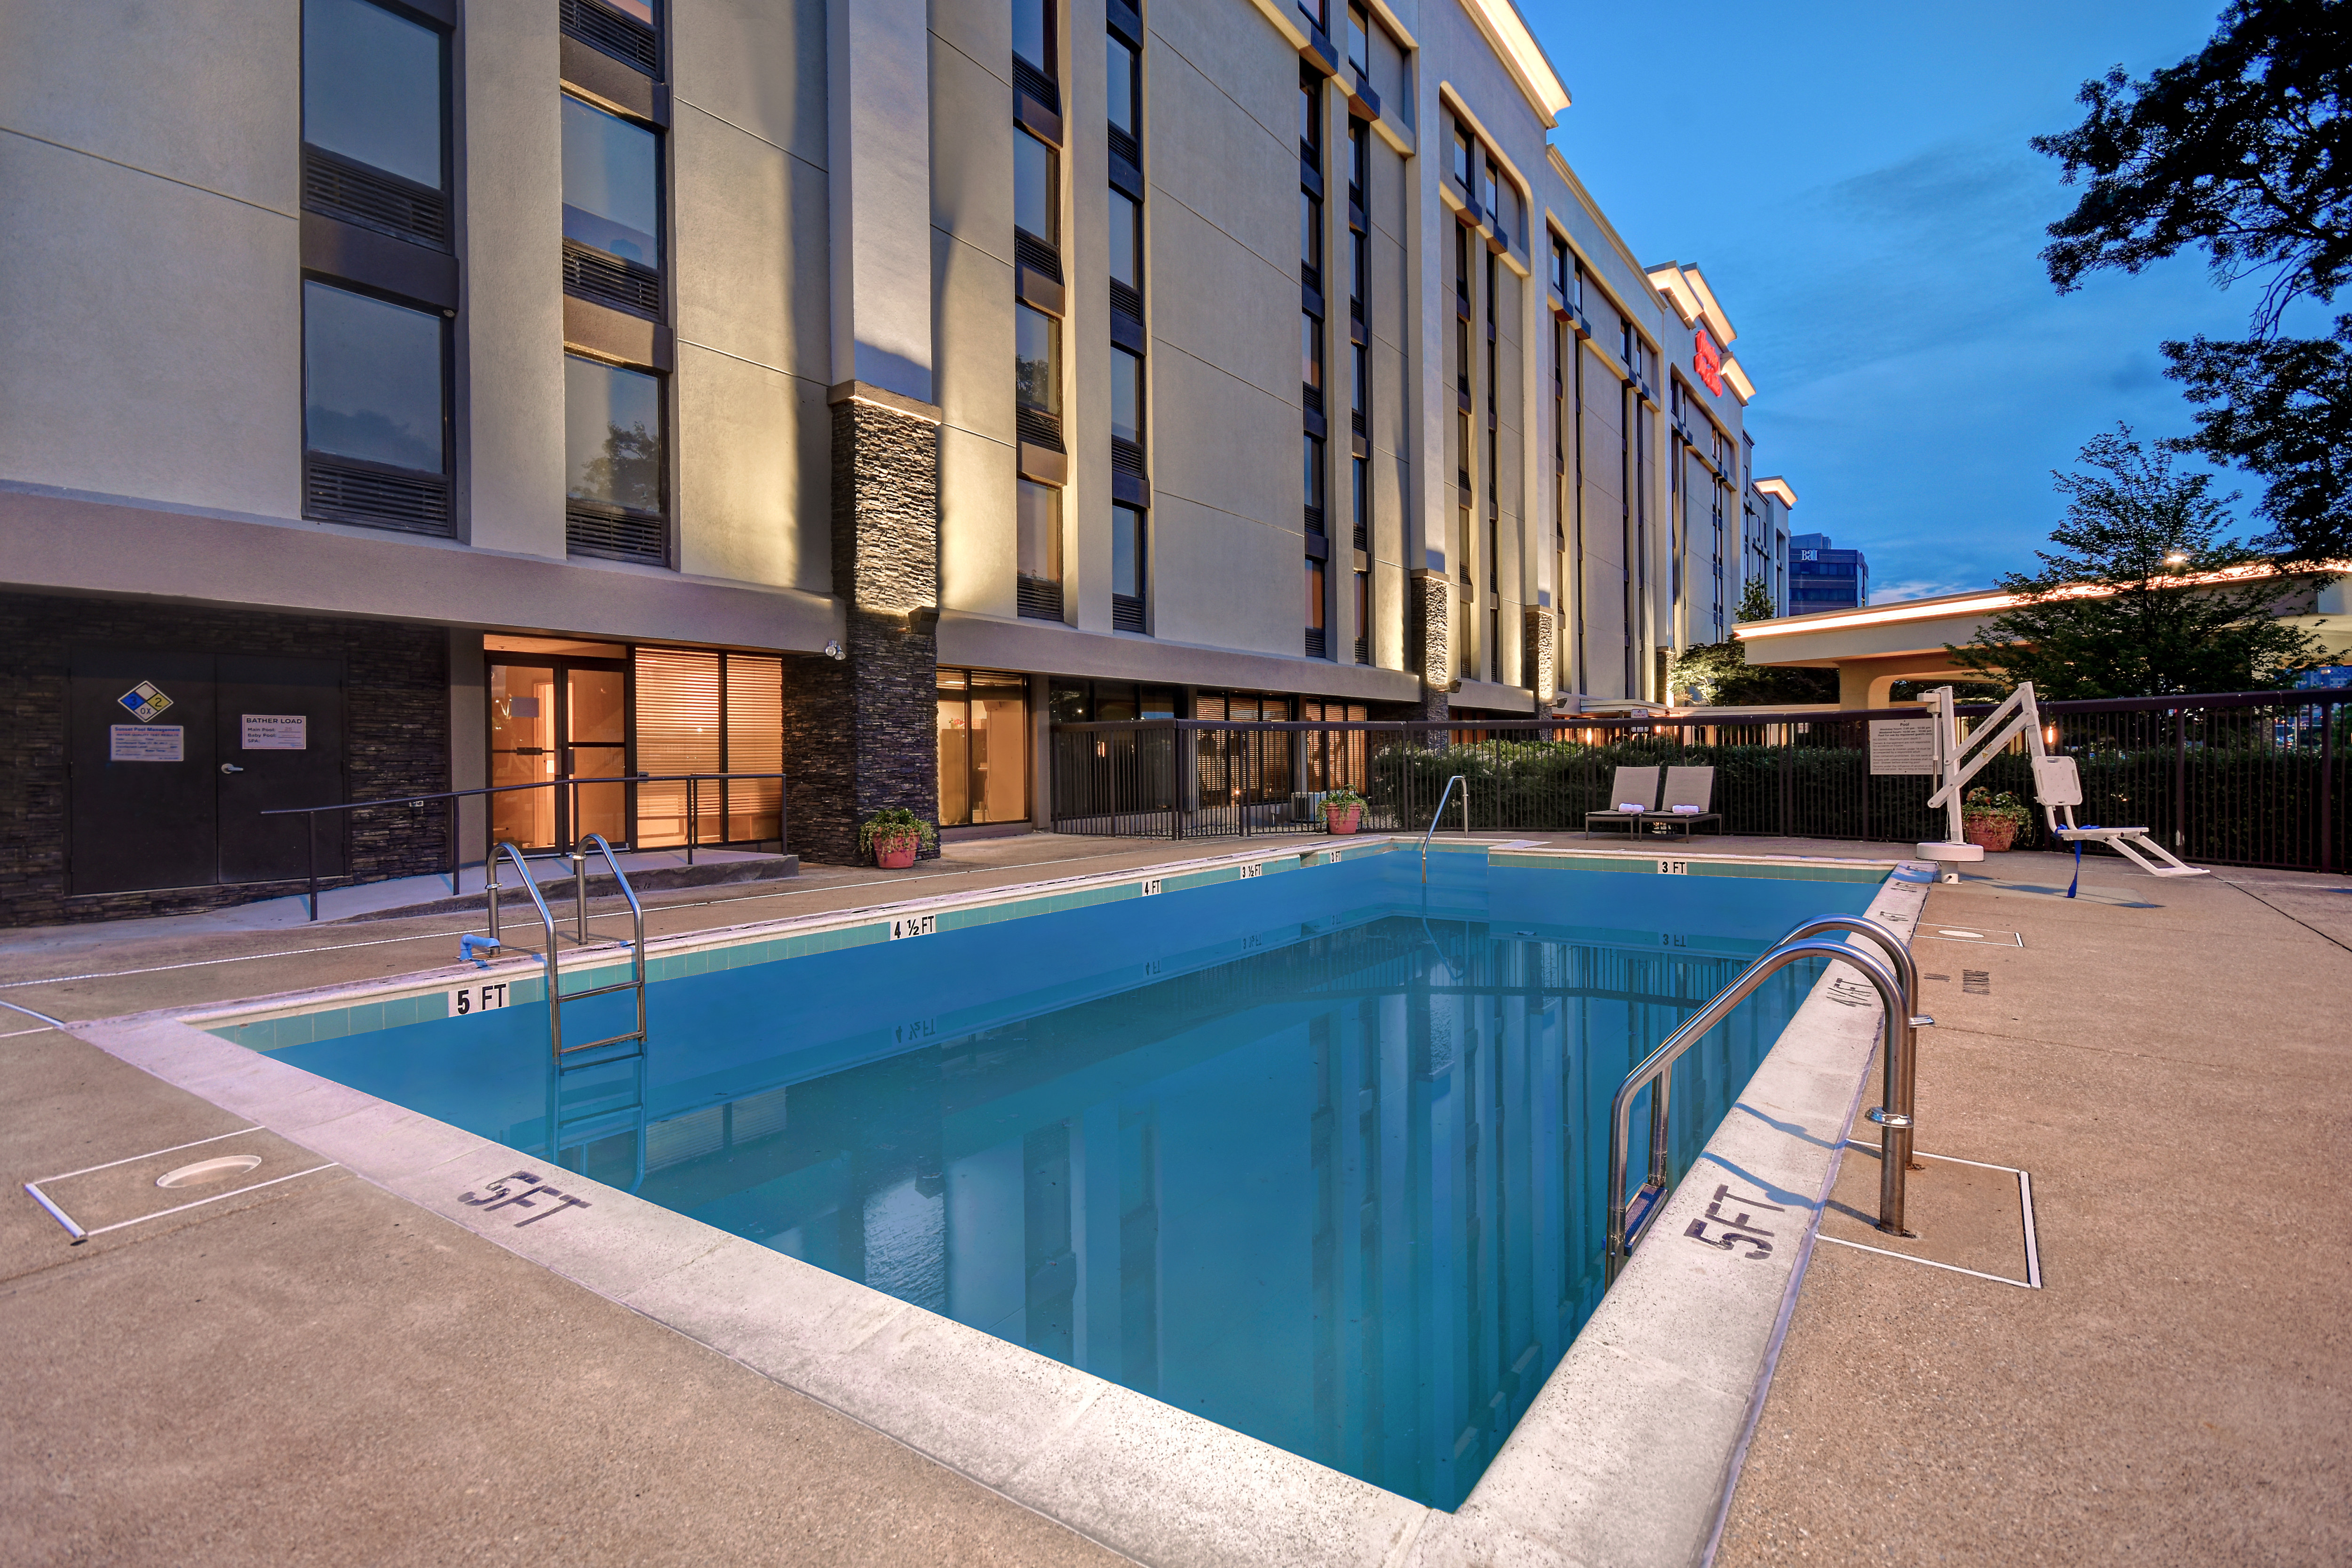 Outdoor Pool Area and View of Hotel Exterior